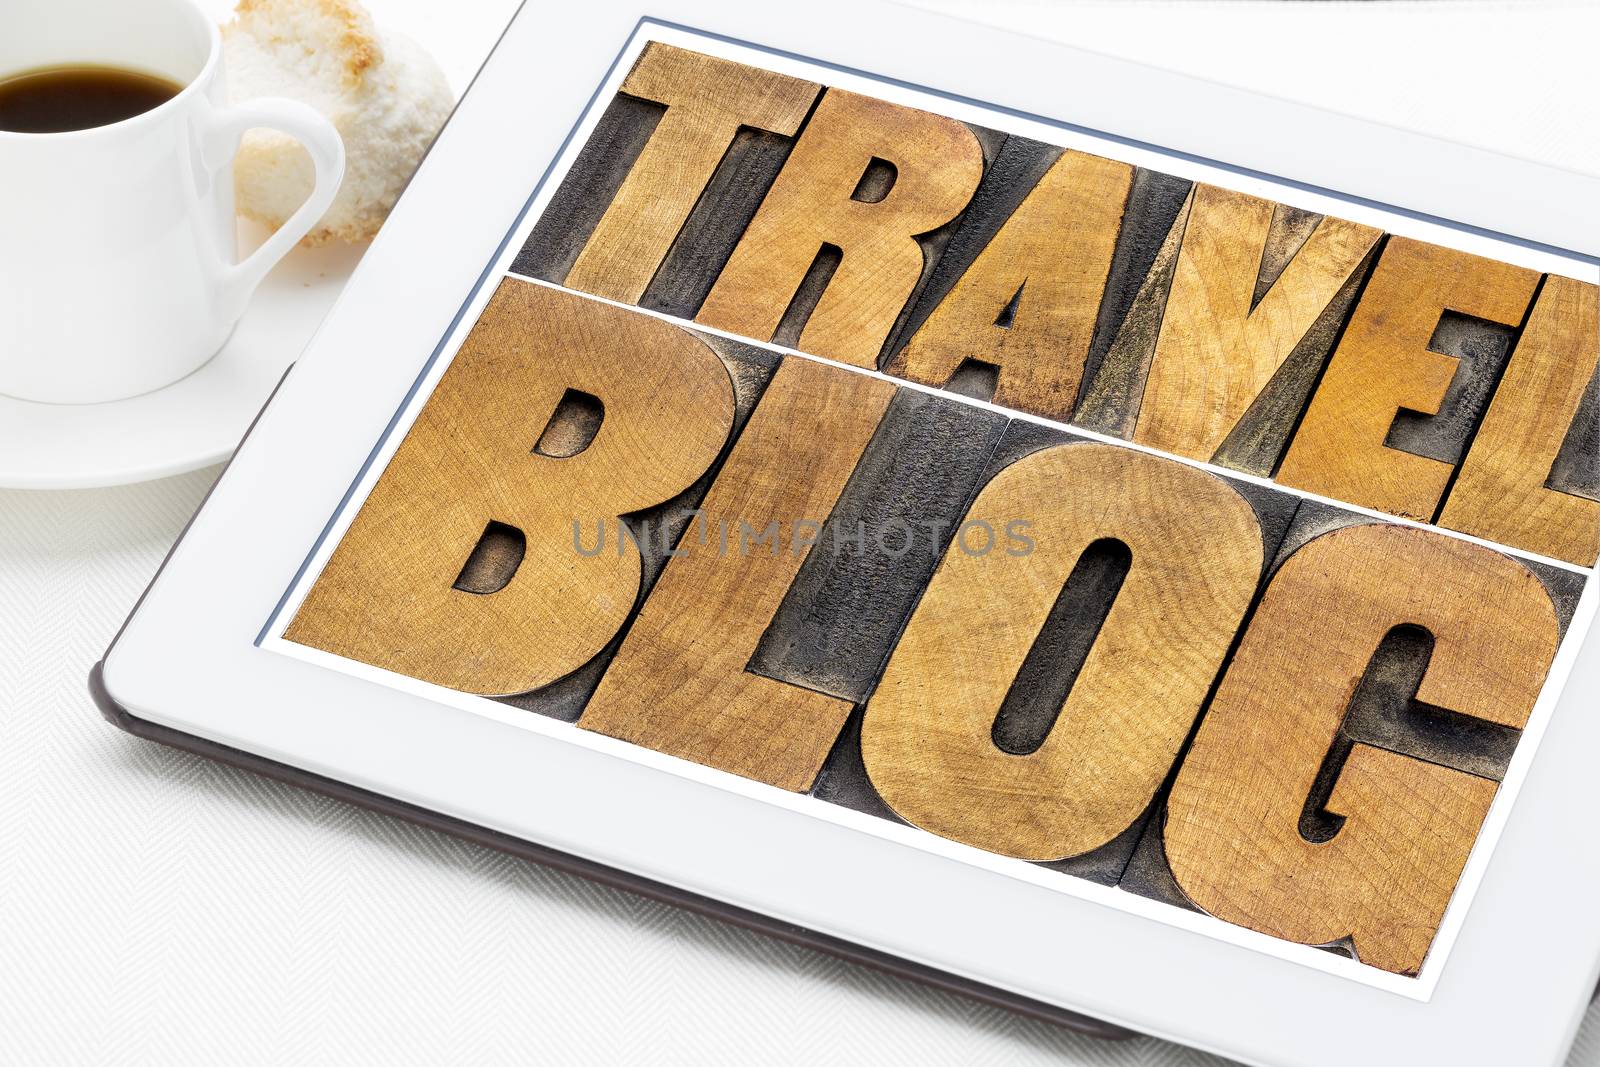 travel blog typography - text in letterpress wood type on a digital tablet with cup of coffee